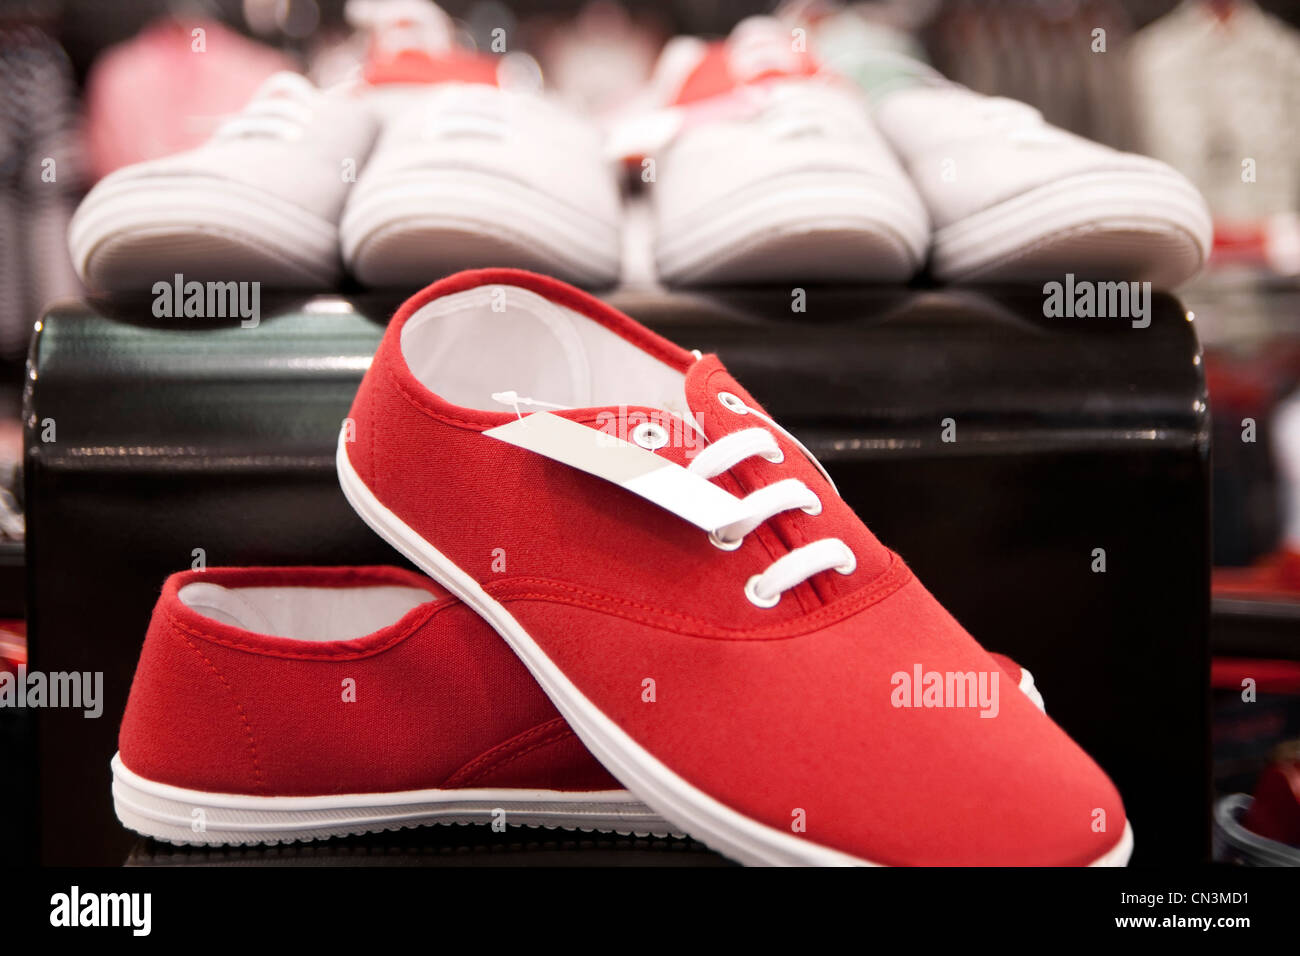 Red sneakers exposed on the shelf. Stock Photo